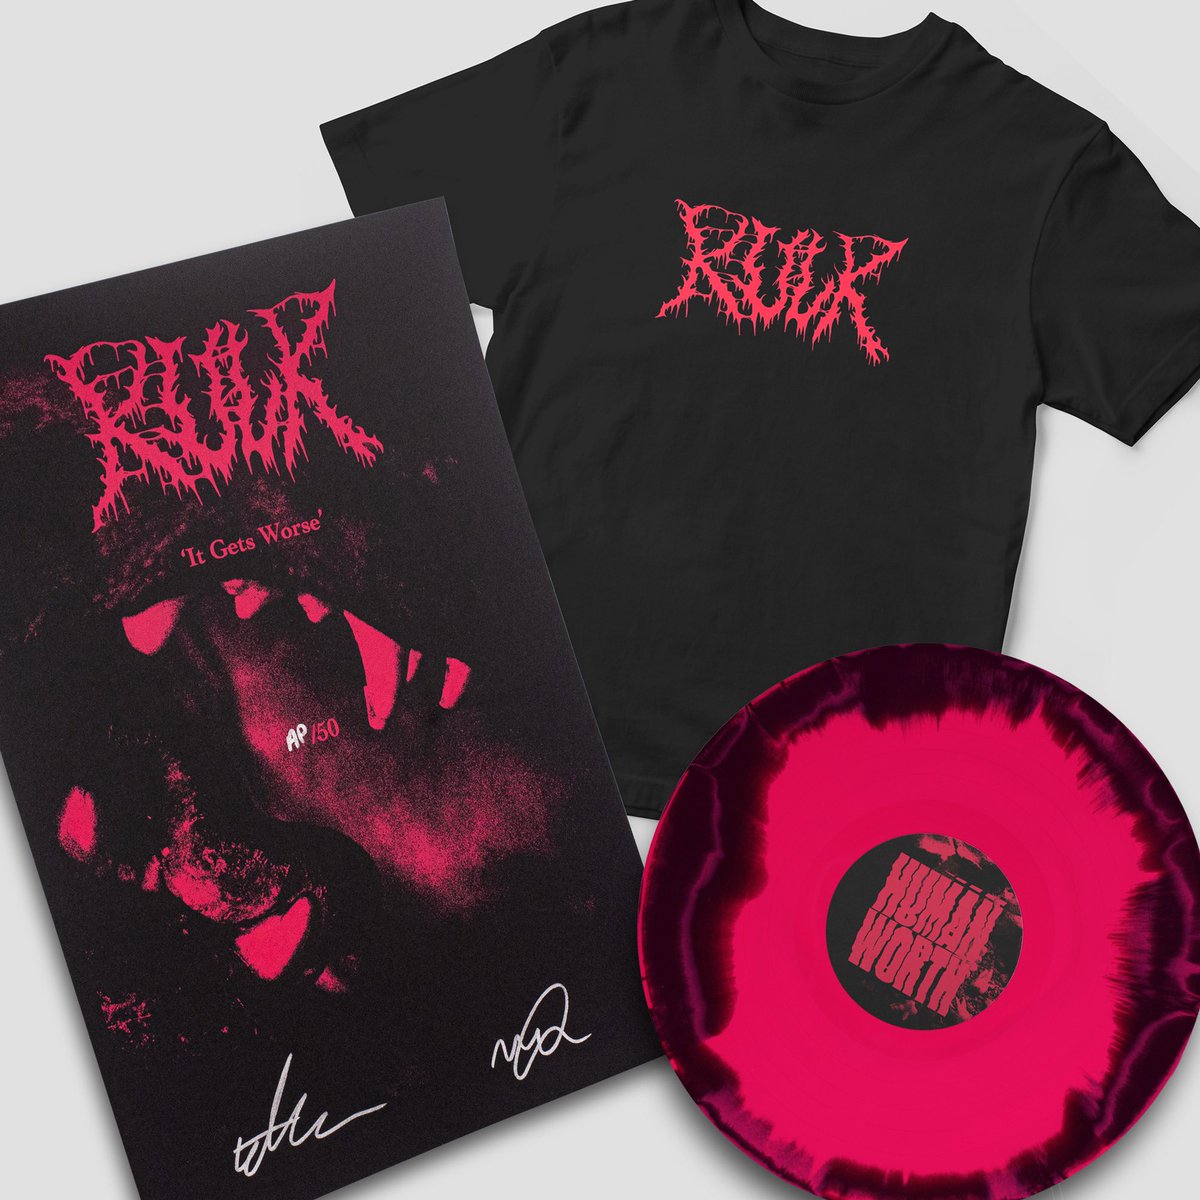 Pre-Orders are live for @kulkband’s immense new LP #ItGetsWorse 💪🖤💥 kulk.bandcamp.com/album/it-gets-… Available as a bundle with a super limited run of signed screenprinted covers, alongside a special ‘Label Exclusive’ t-shirt eco-screenprinted by #VinoSangre 🔥 #Kulk #HumanWorth